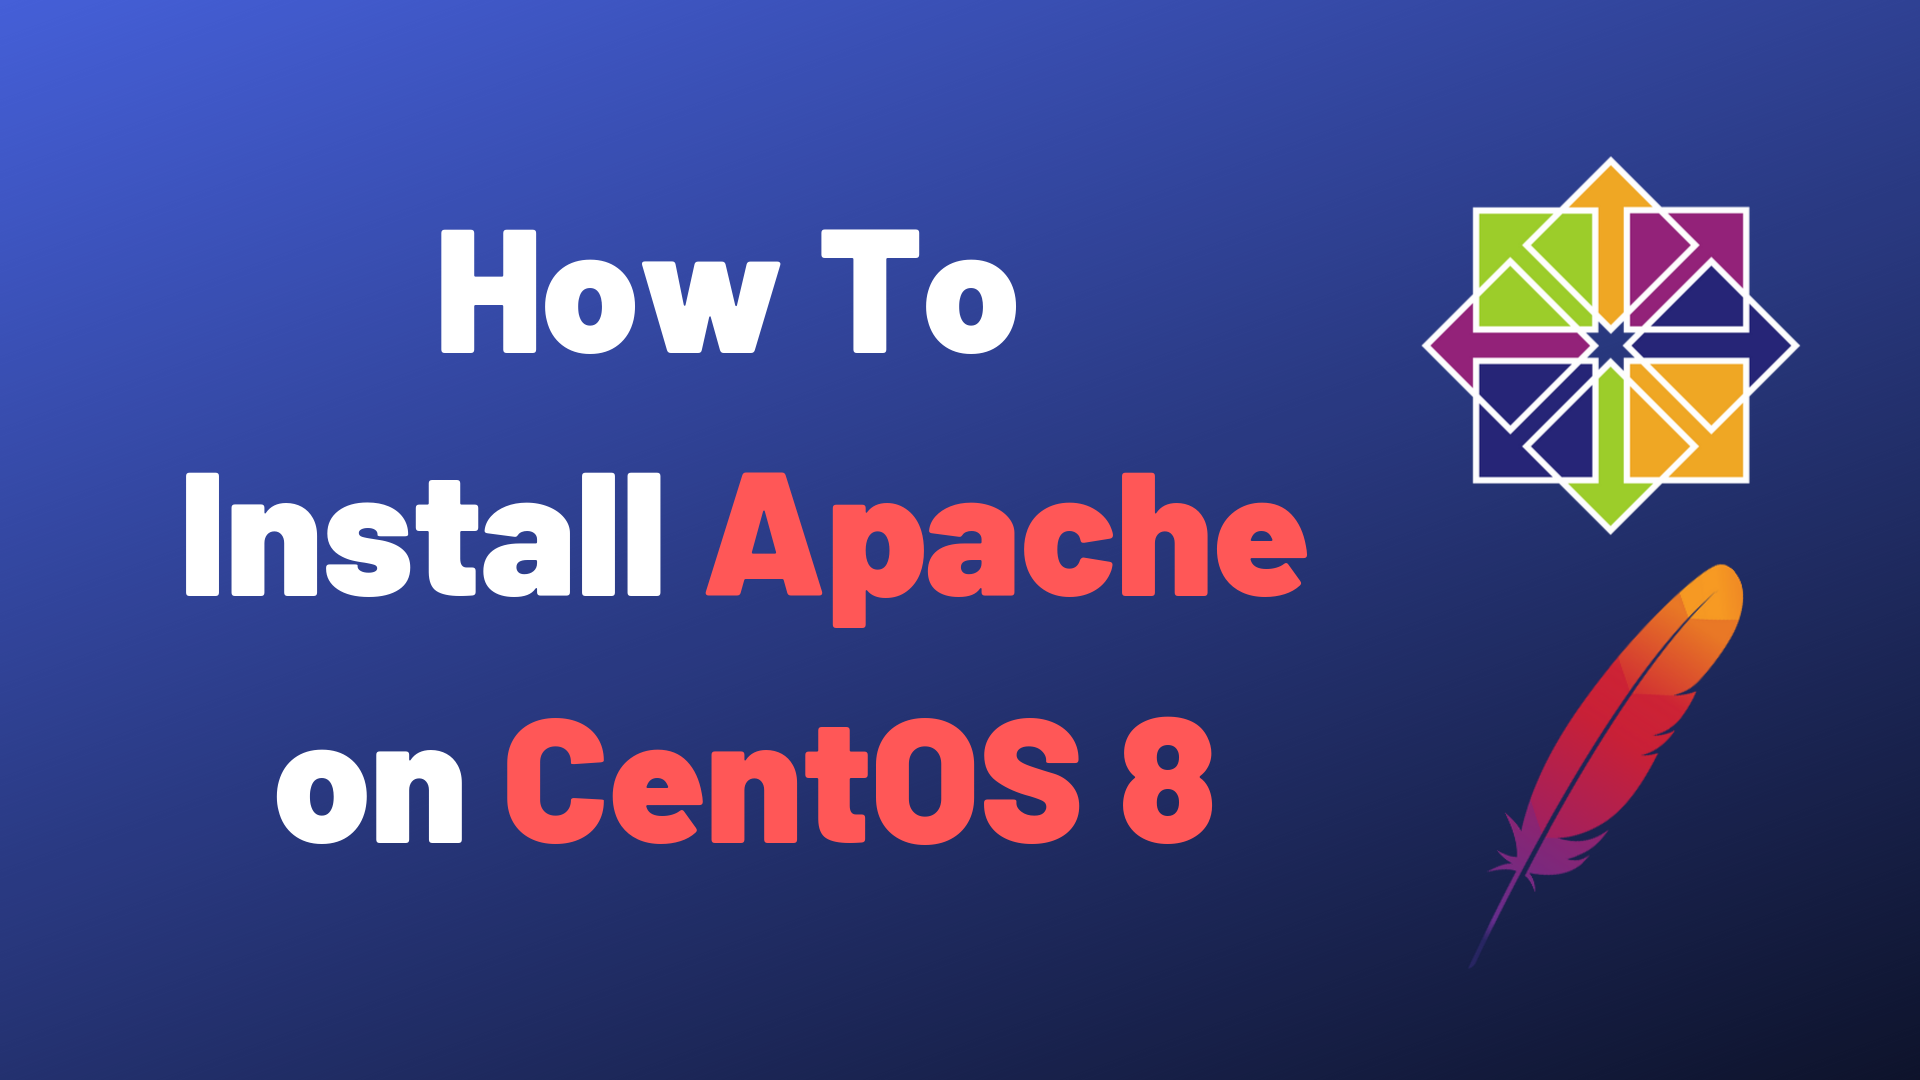 How To Install Apache on CentOS 8